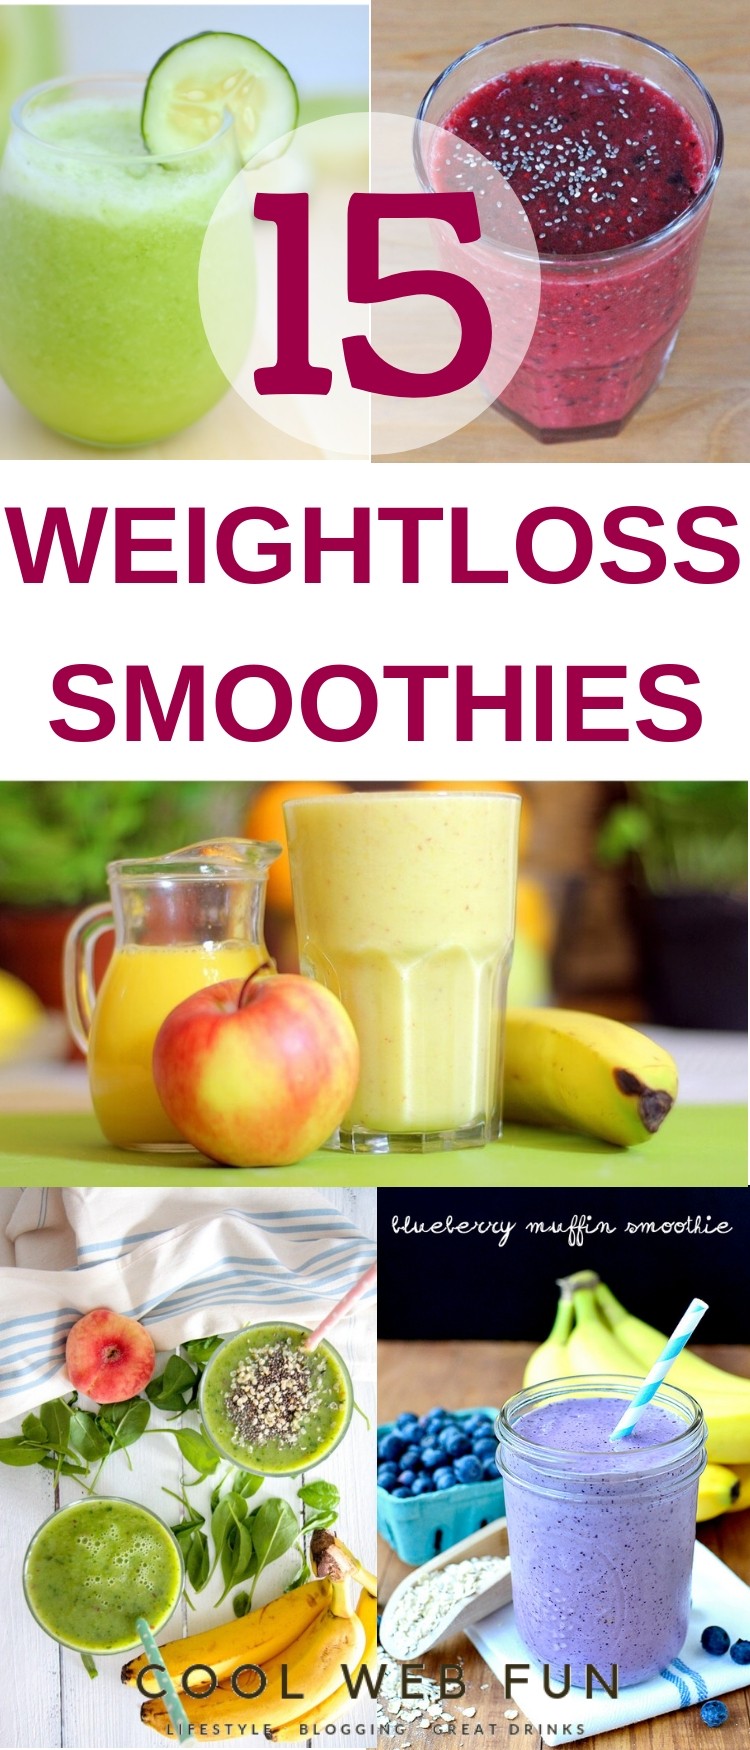 weightloss smoothies 2